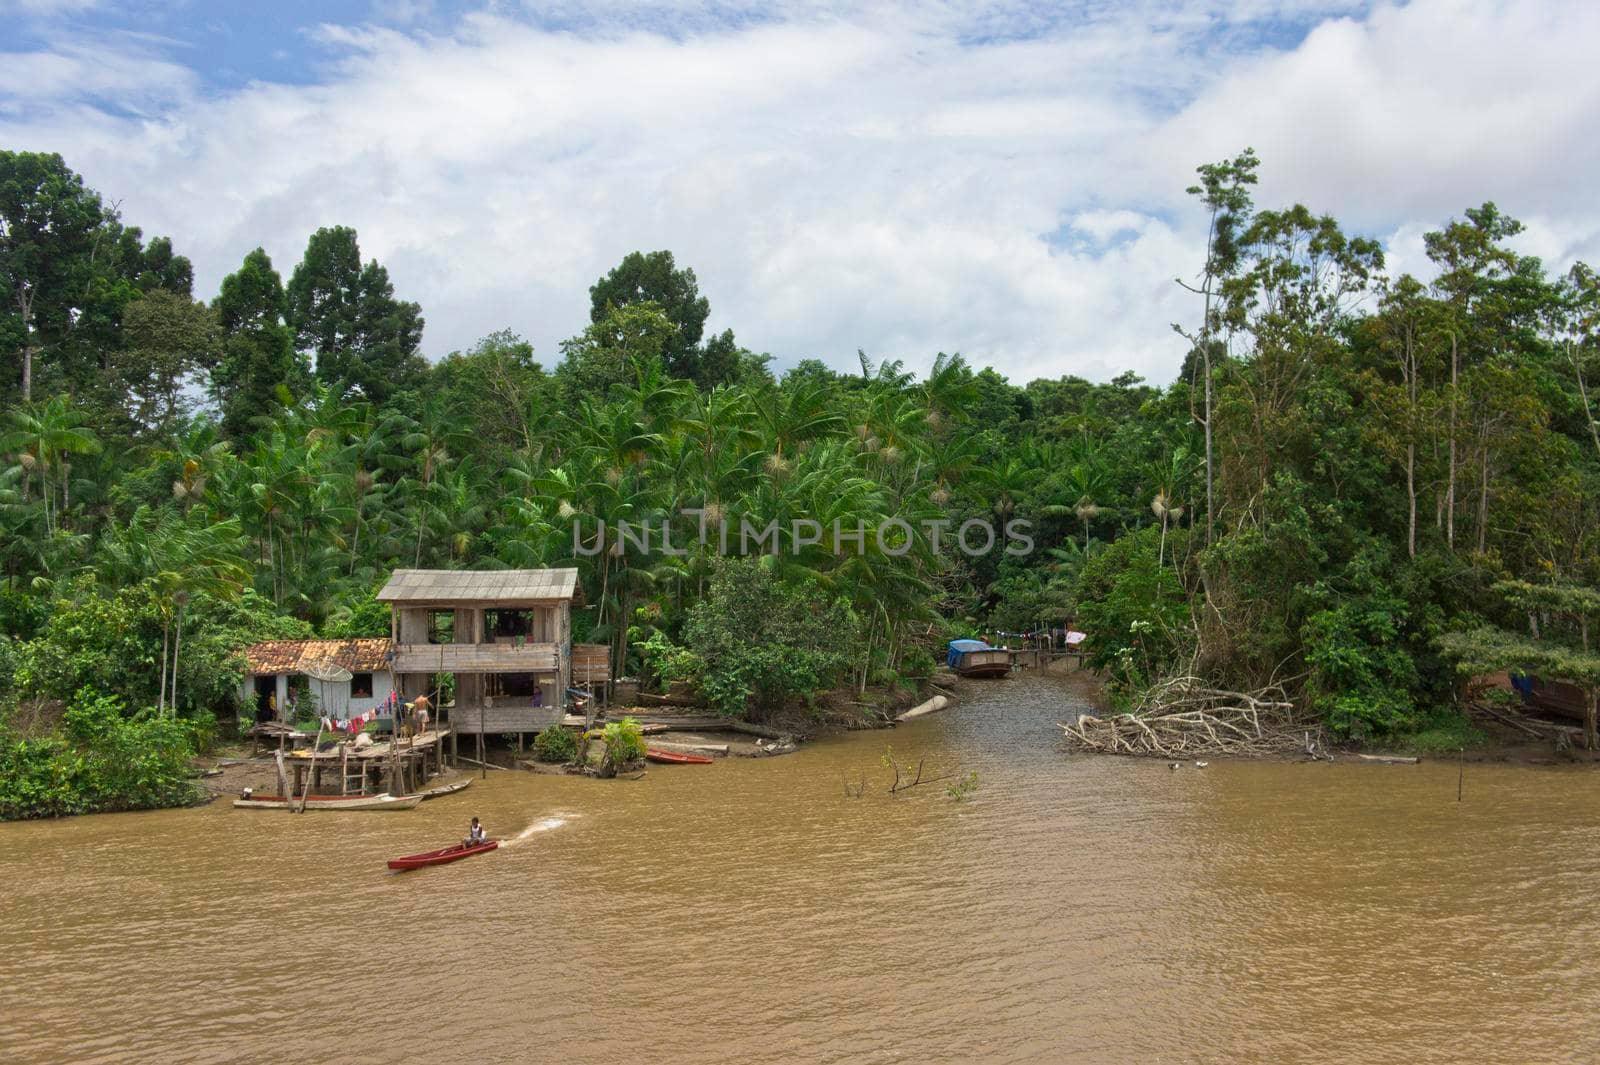 Amazon river view, Indians Village by the river, Brazil, South America by giannakisphoto